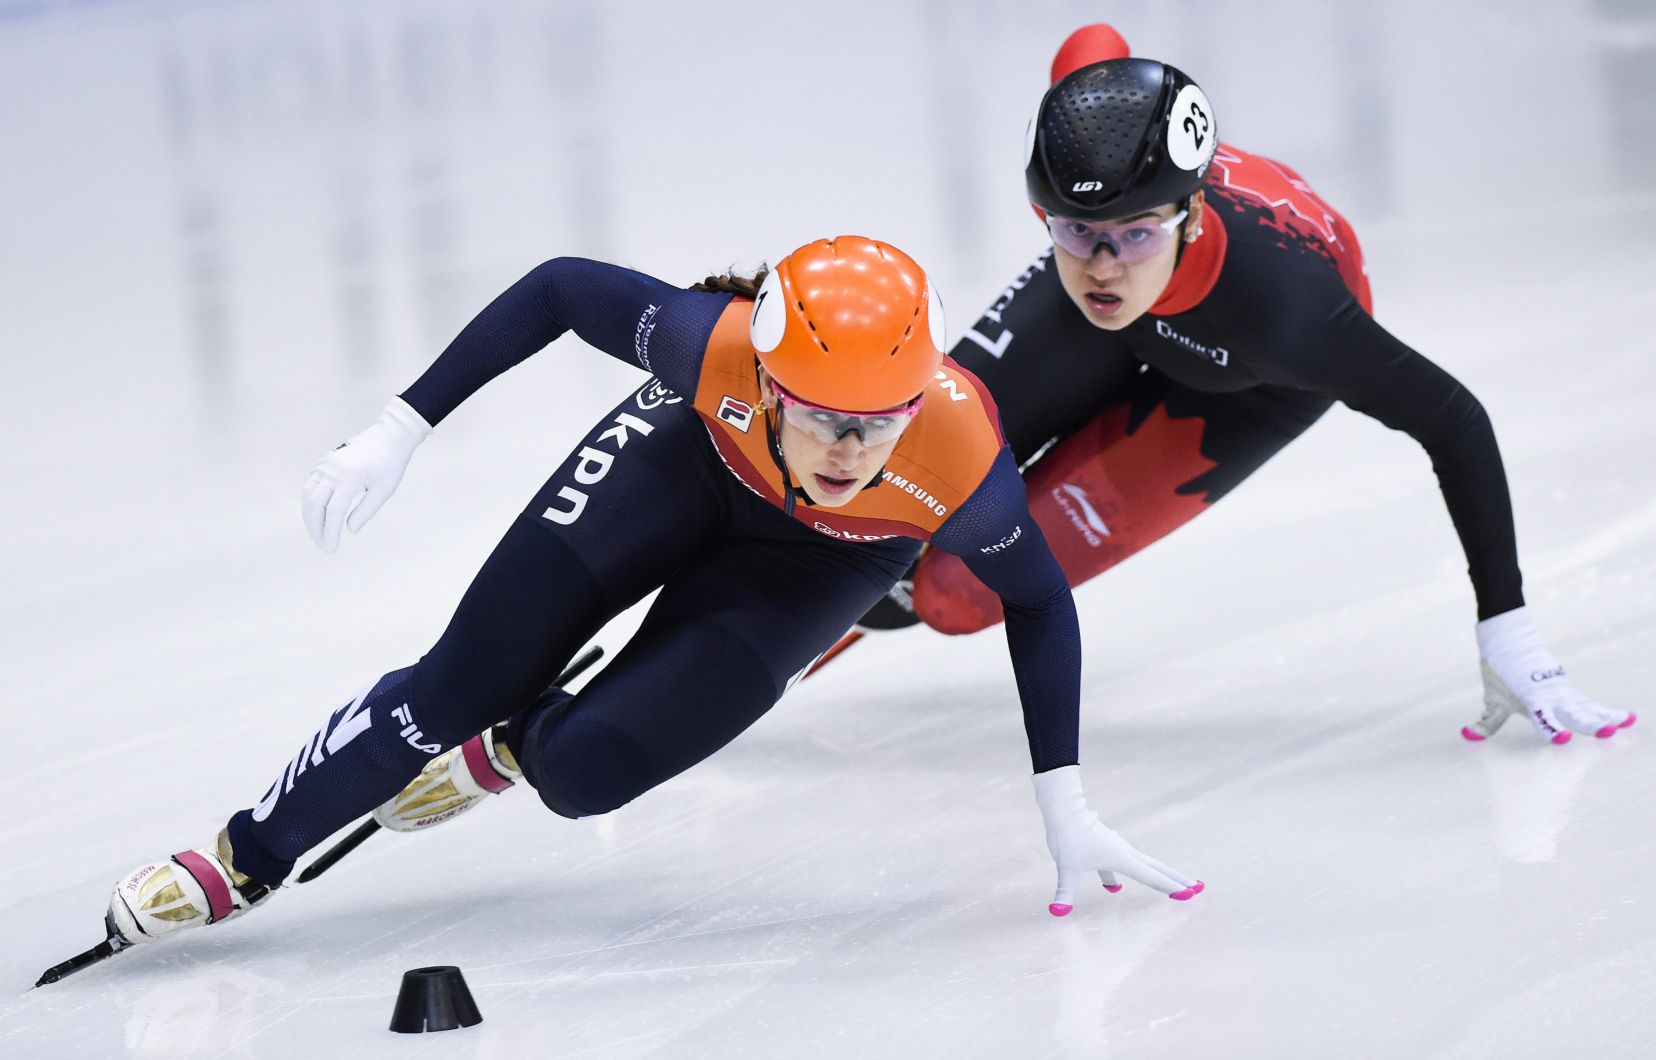 Four medals for Canada in the World Short Track

